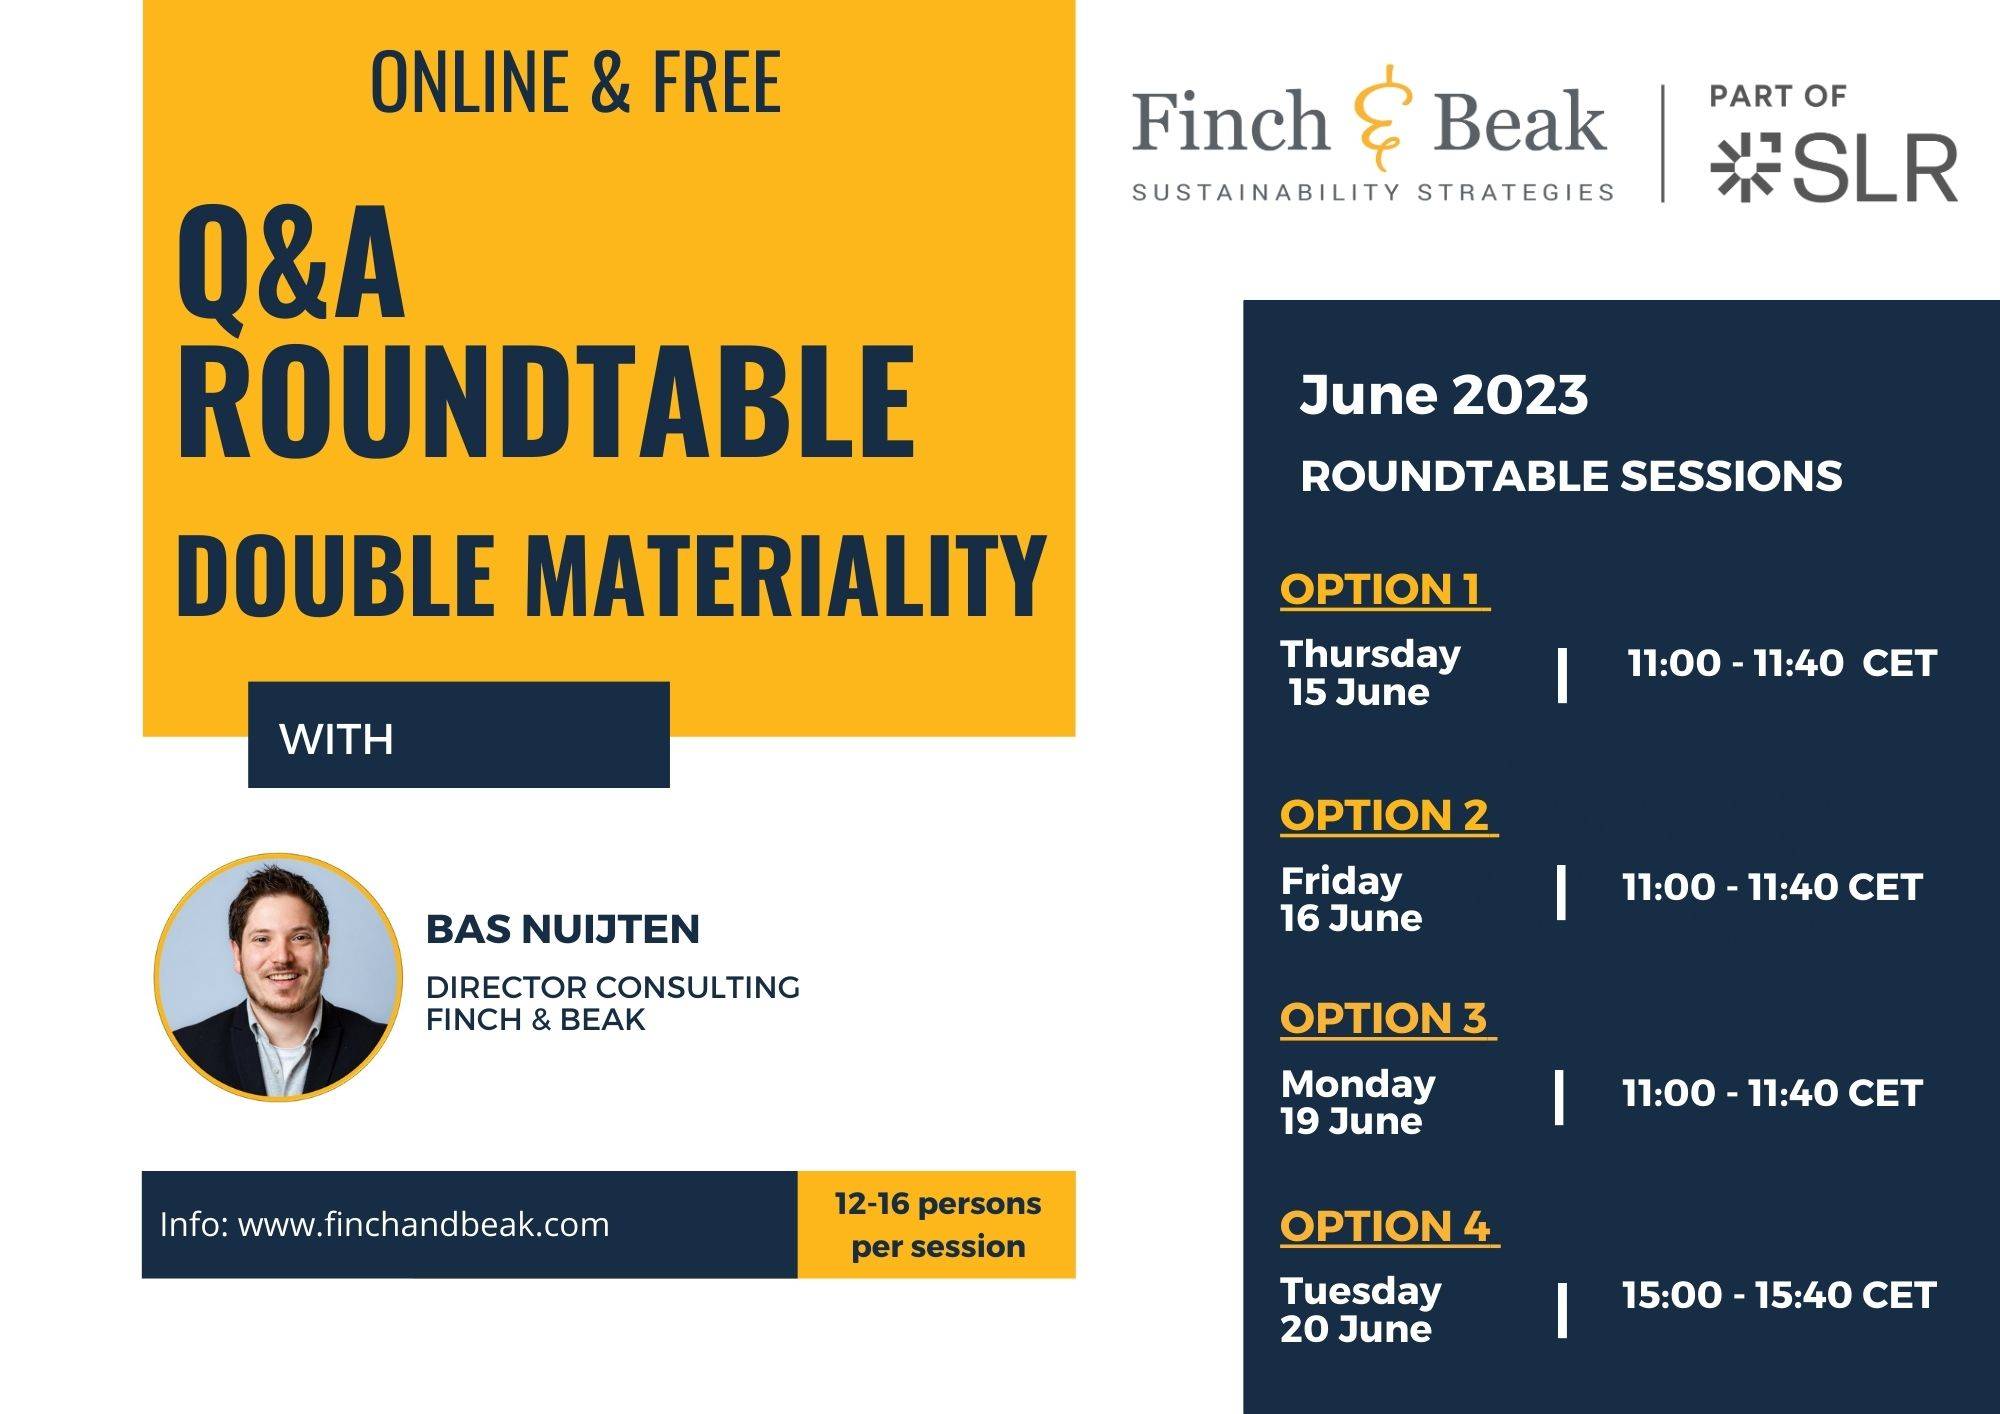 Four More Double Materiality Roundtable Sessions in June